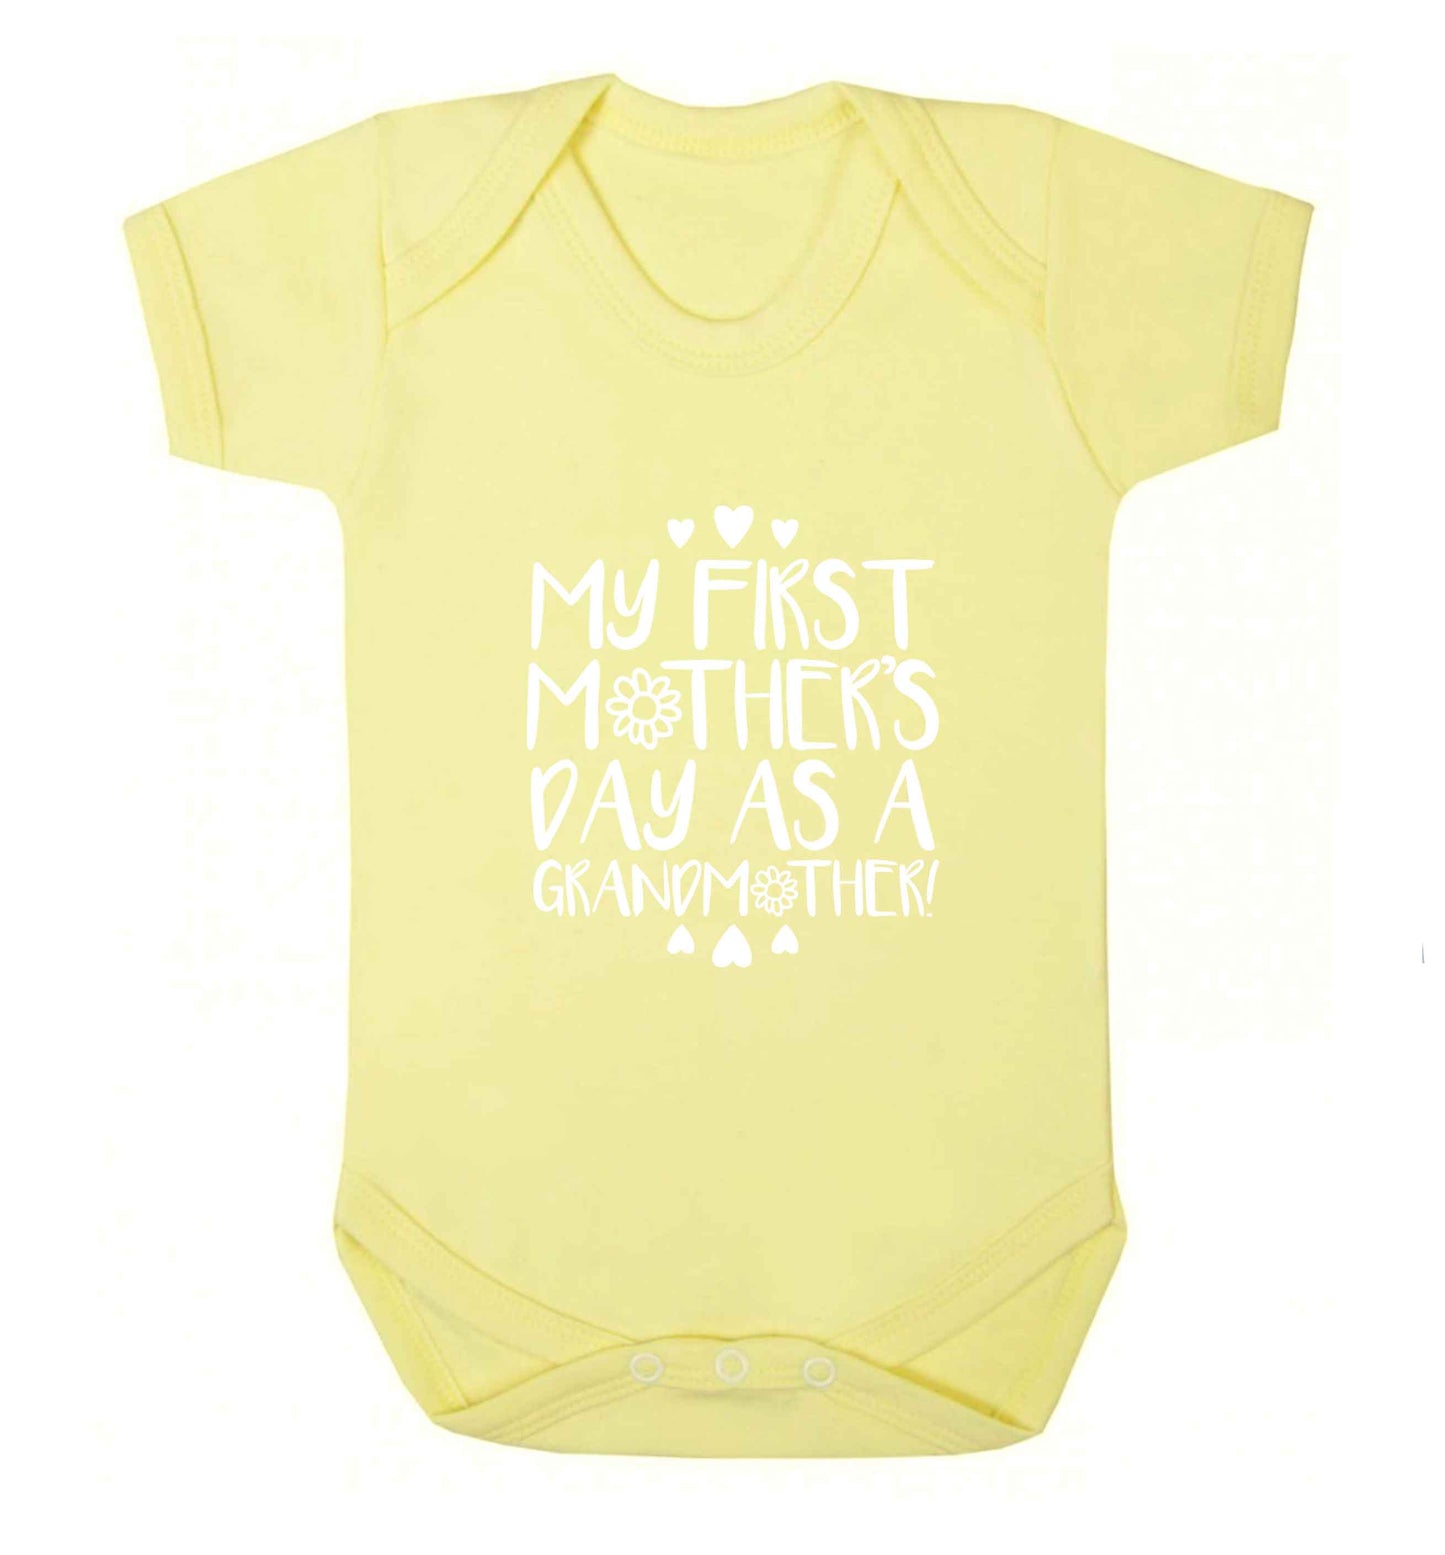 It's my first mother's day as a grandmother baby vest pale yellow 18-24 months